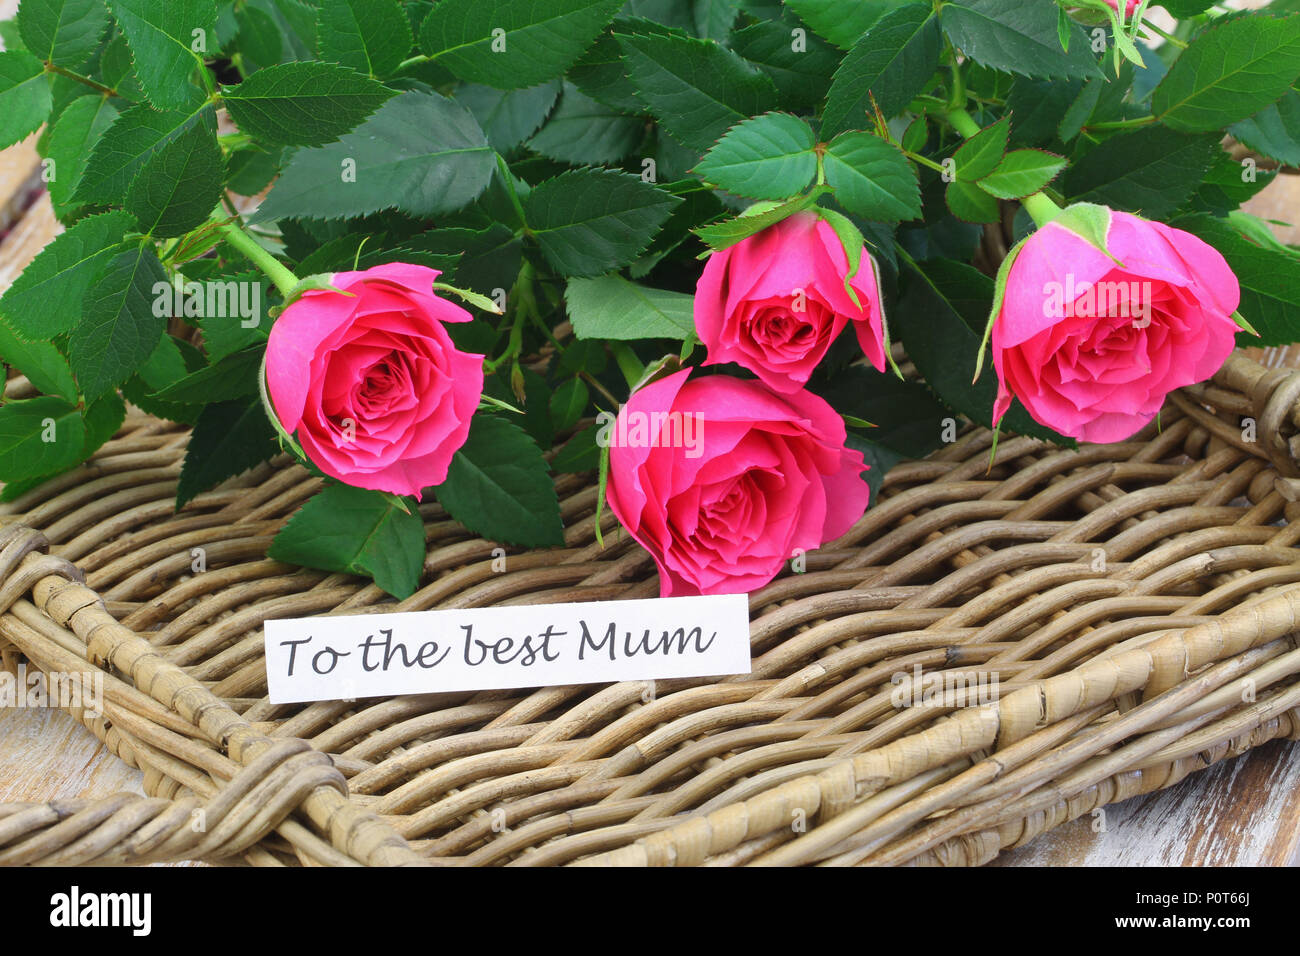 To the best Mum card with pink wild roses on wicker surface Stock Photo